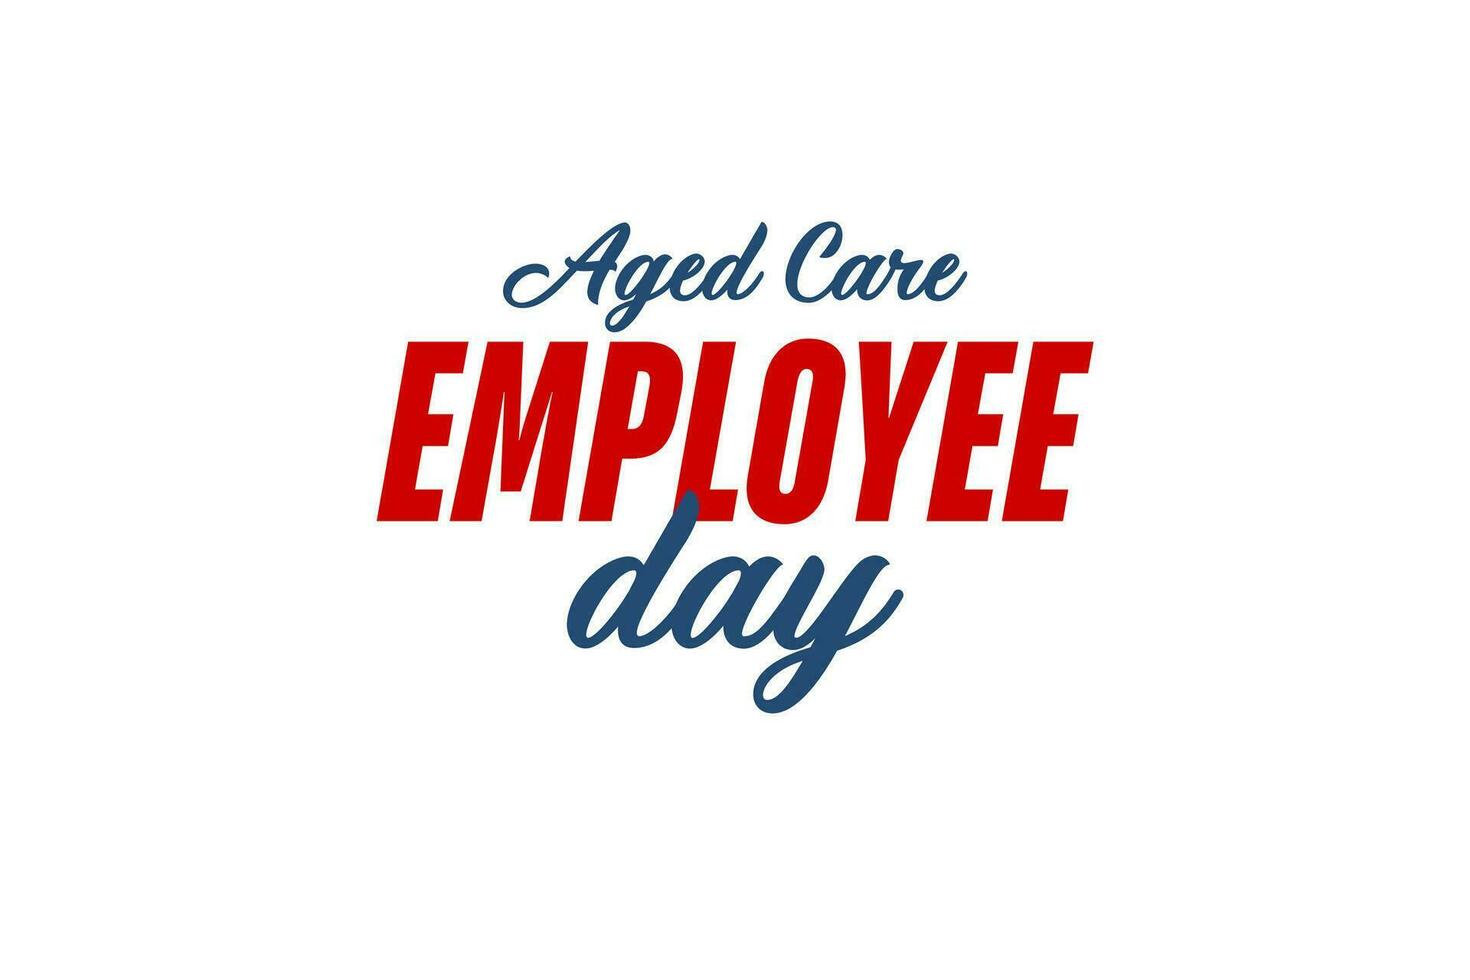 Aged Care Employee Day, background template Holiday concept vector